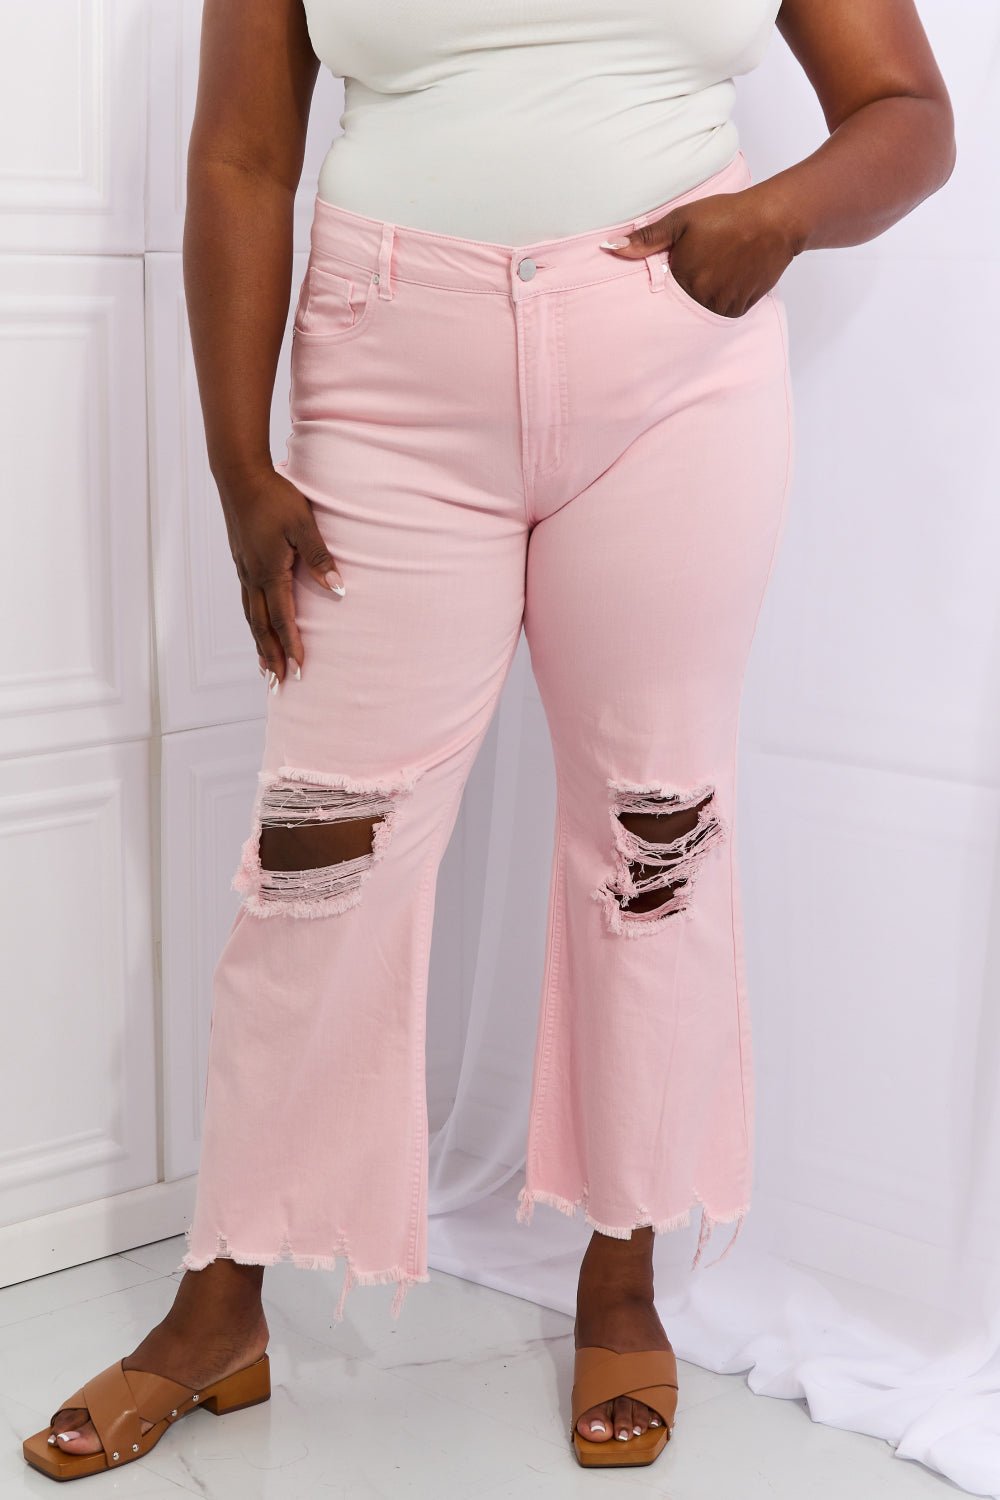 Distressed Ankle Flare Jeans in Blush PinkJeansRISEN